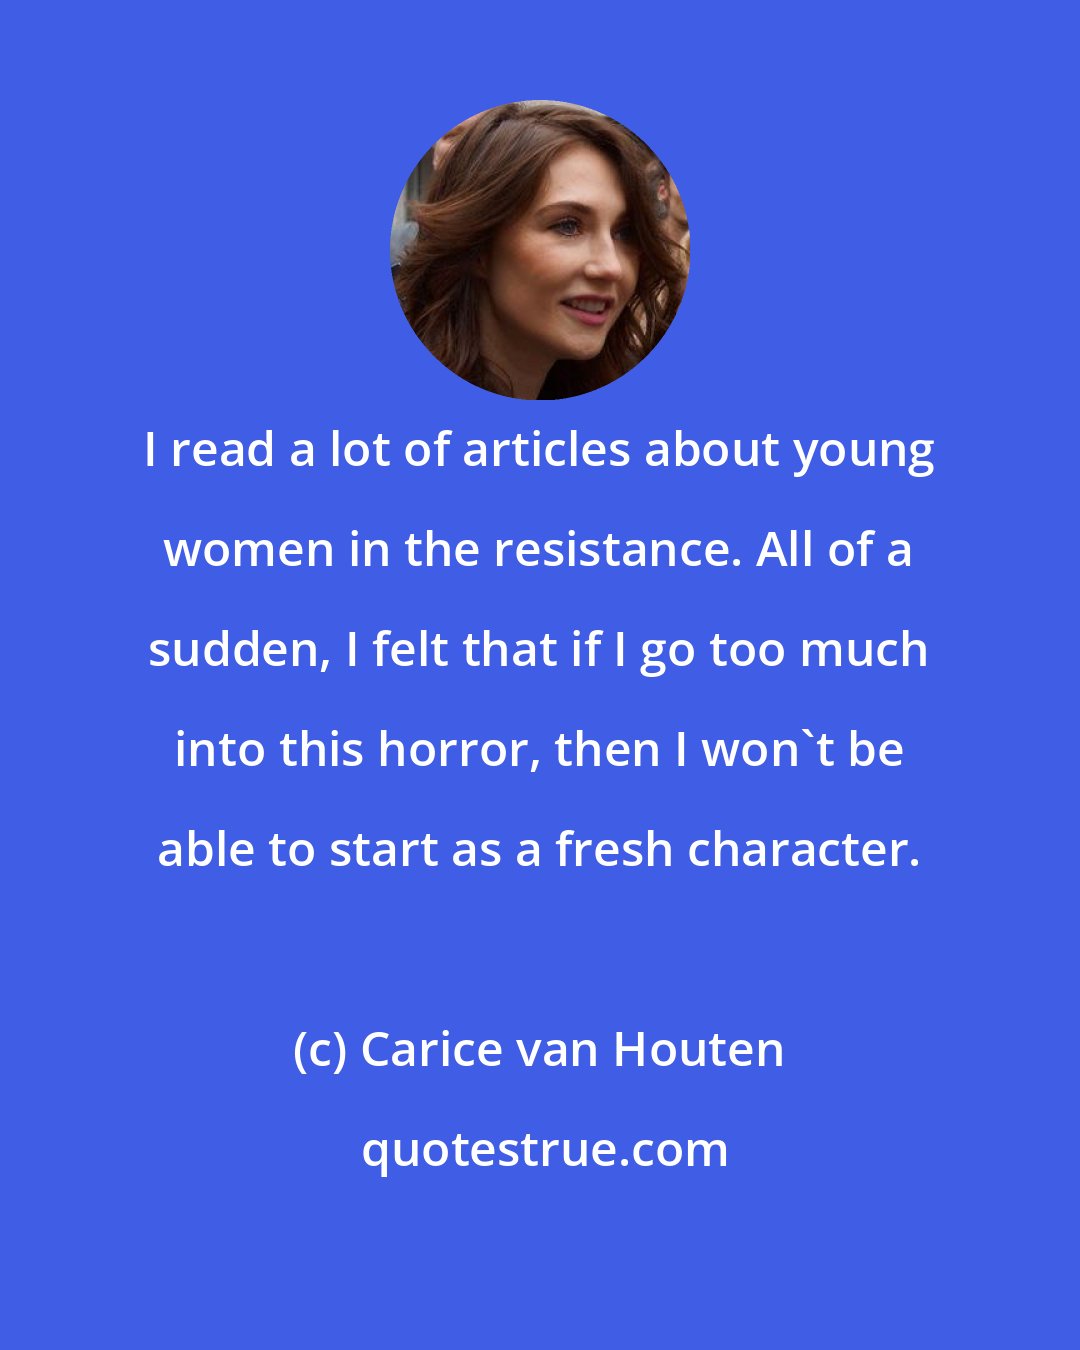 Carice van Houten: I read a lot of articles about young women in the resistance. All of a sudden, I felt that if I go too much into this horror, then I won't be able to start as a fresh character.